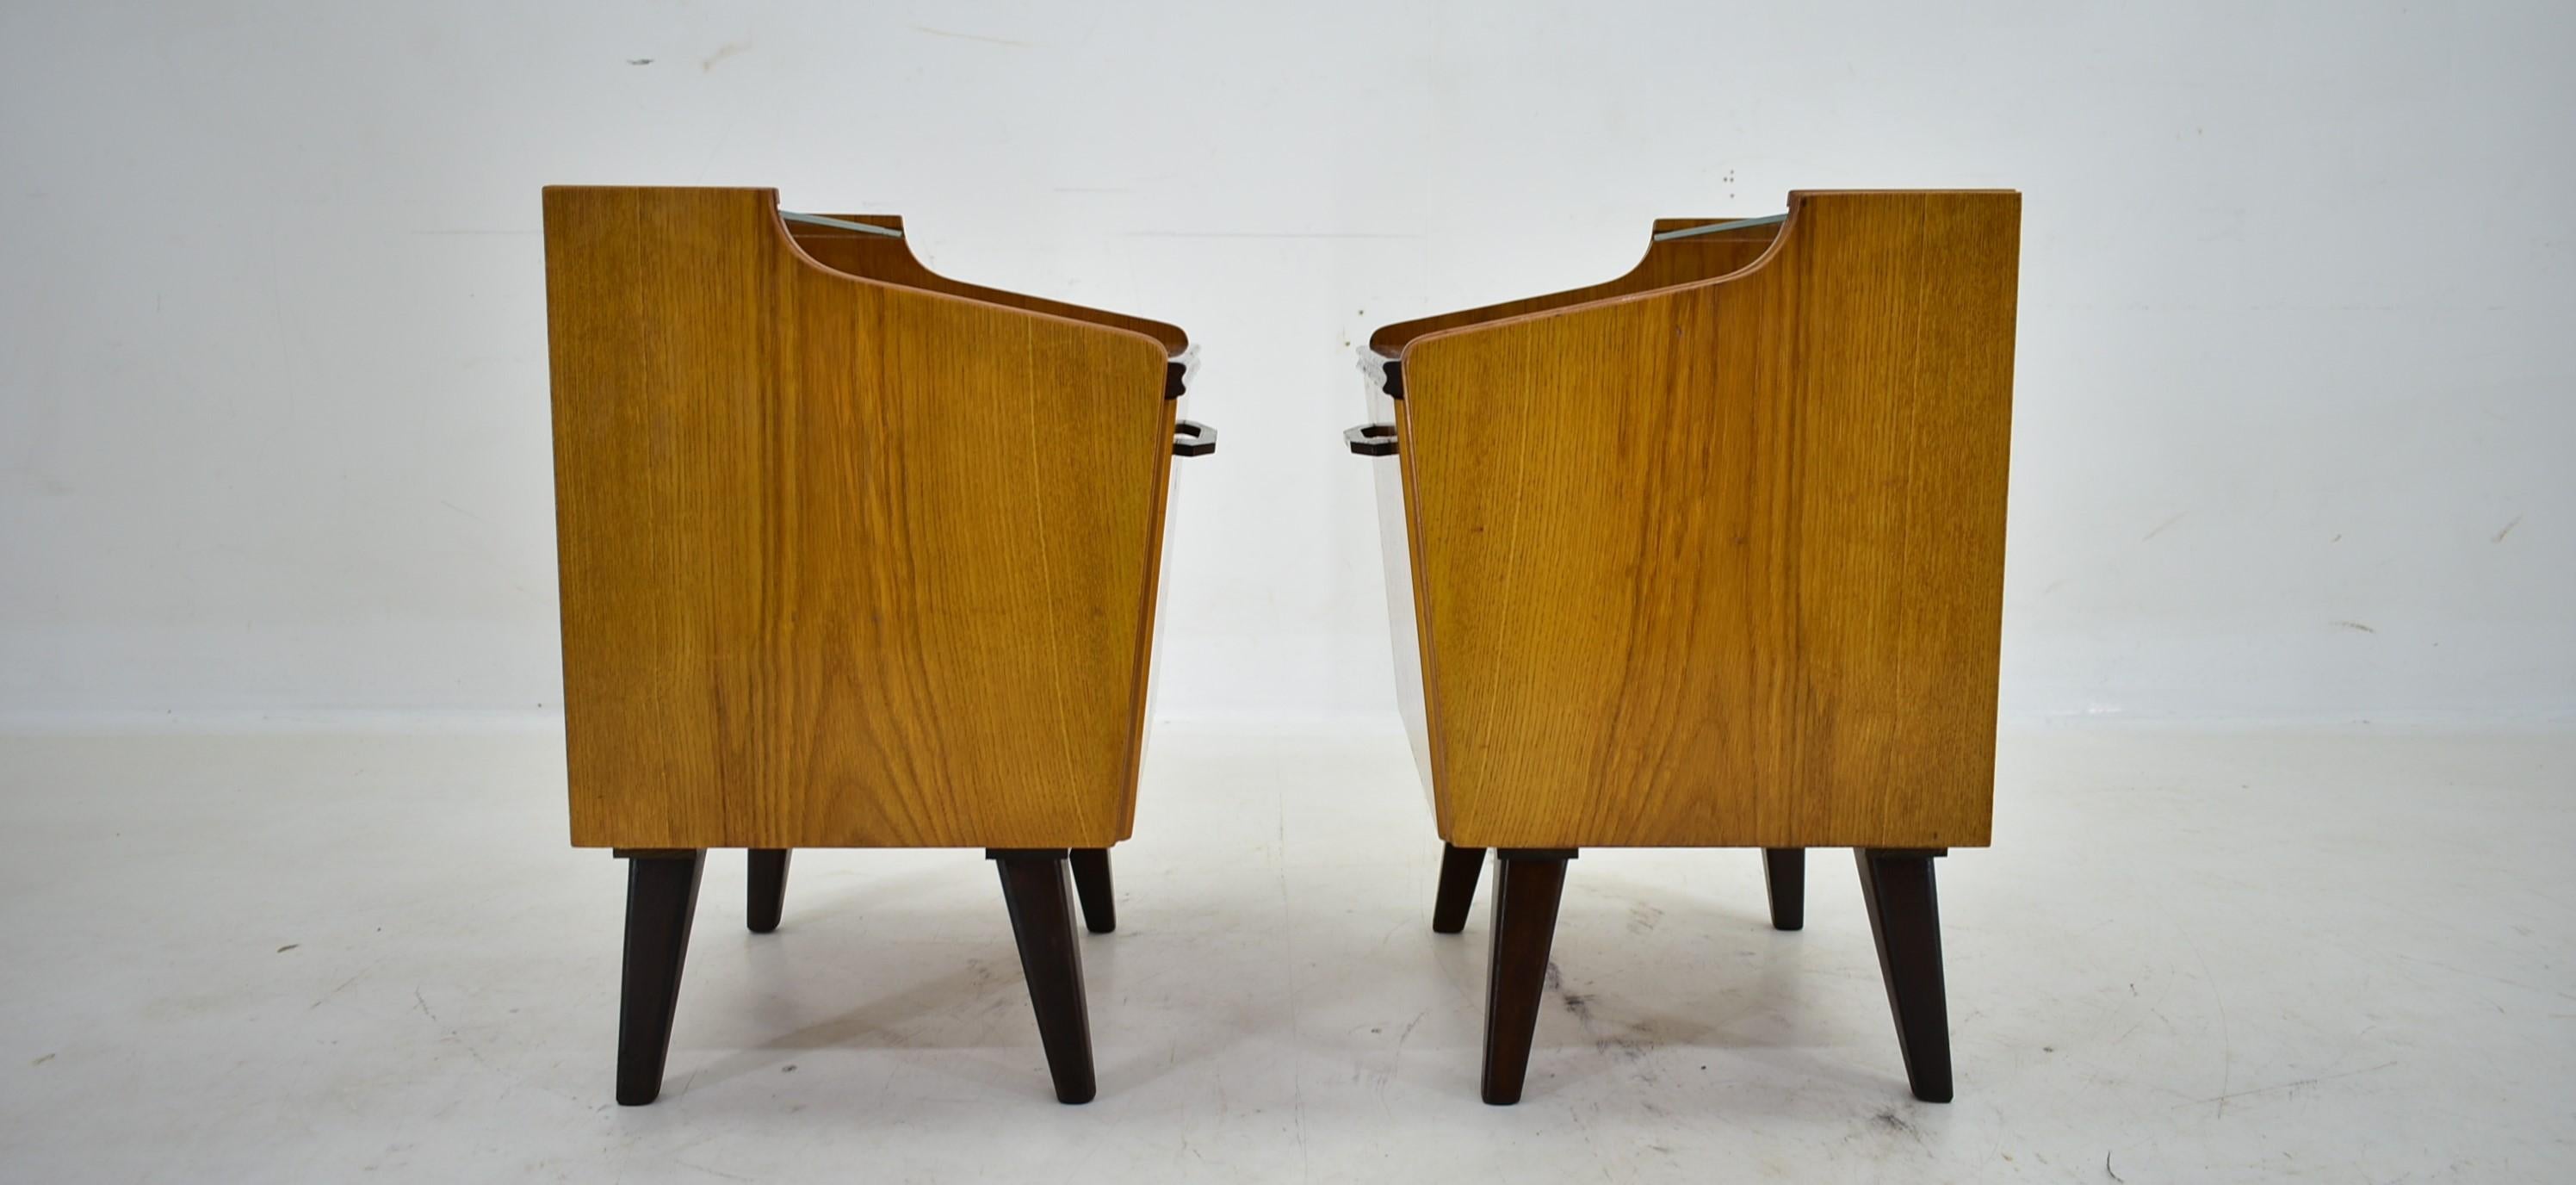 1960s Pair of Midcentury Bedside Tables by Mojmir Požár, Czechoslovakia For Sale 11